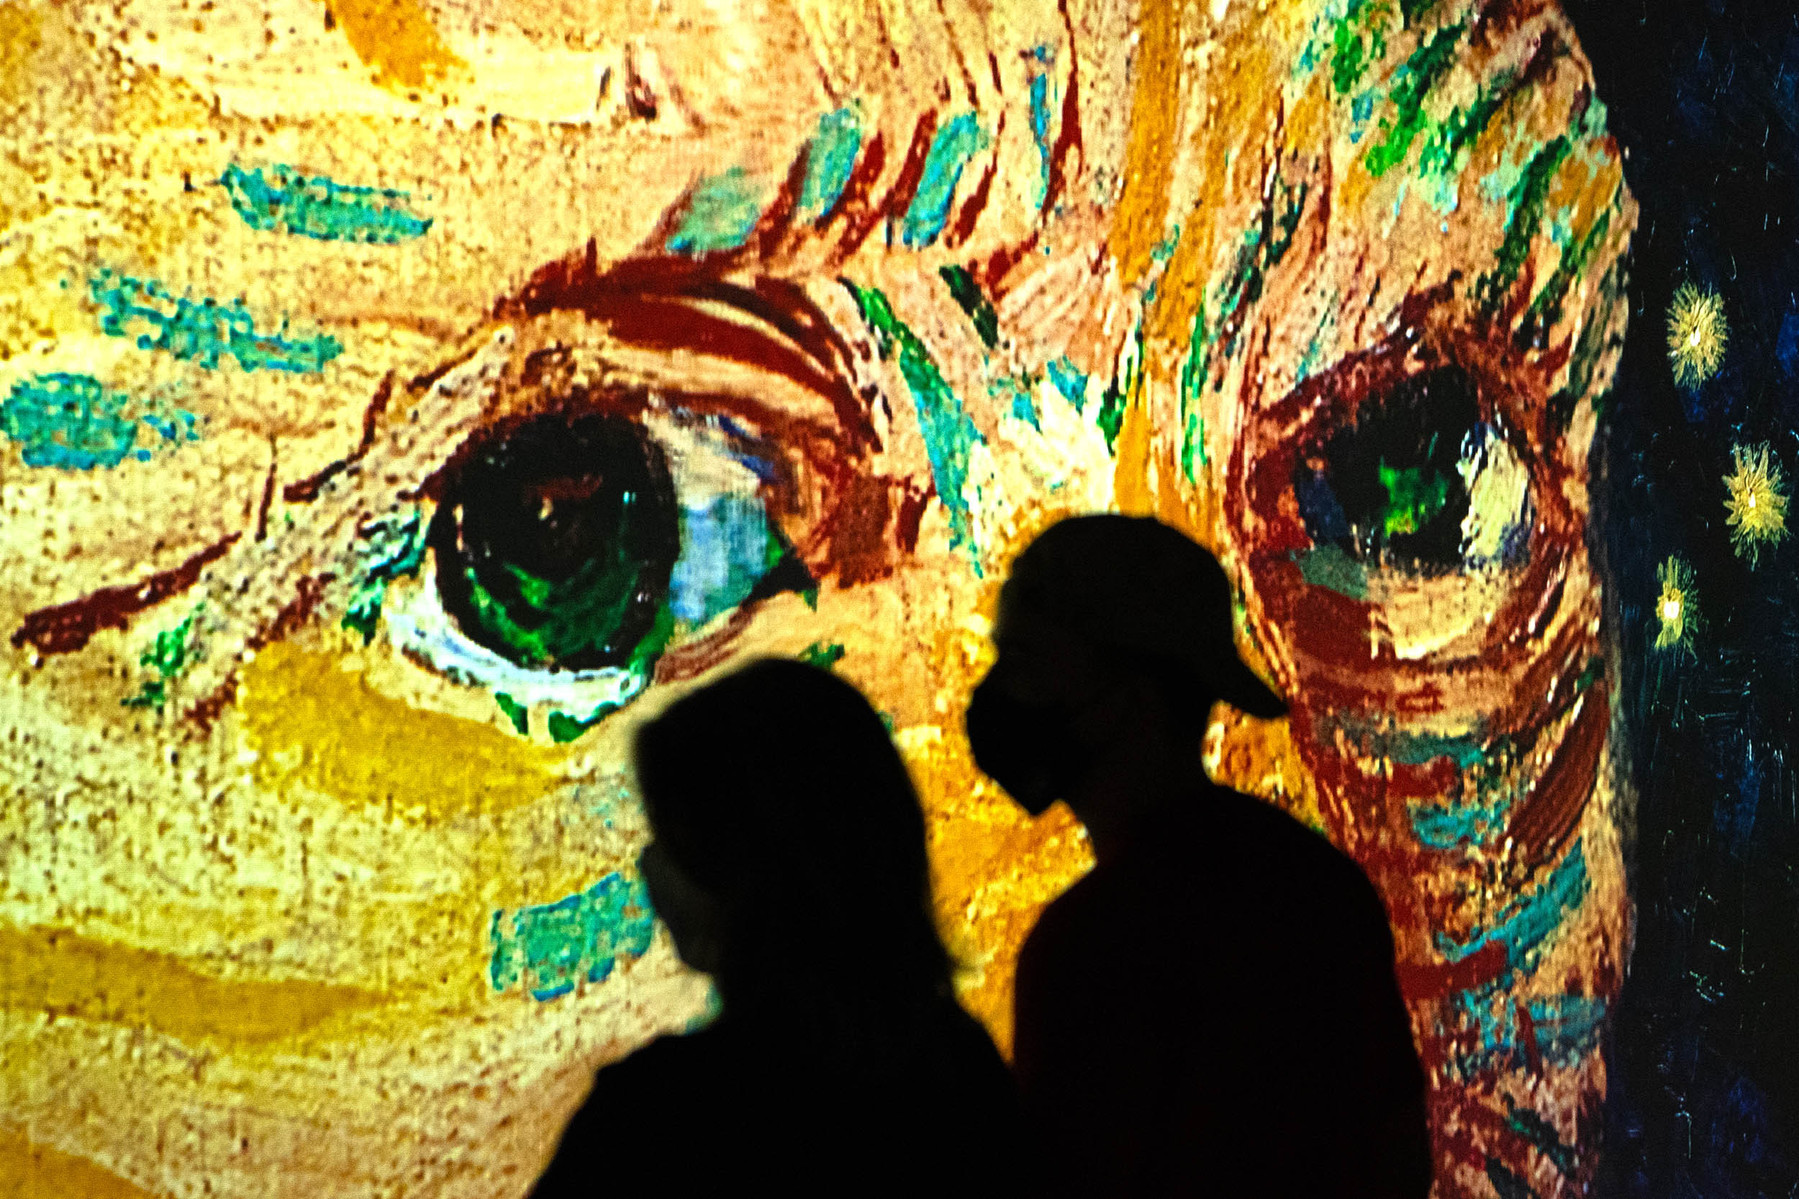 TORONTO, Ont. (11/09/21) - Visitors to Immersive Van Gogh--an audio-visual experience where artworks by Vincent Van Gogh are projected onto walls--are photographed in Toronto, Ont. on Sept. 11, 2021. Photo by Alex Lupul